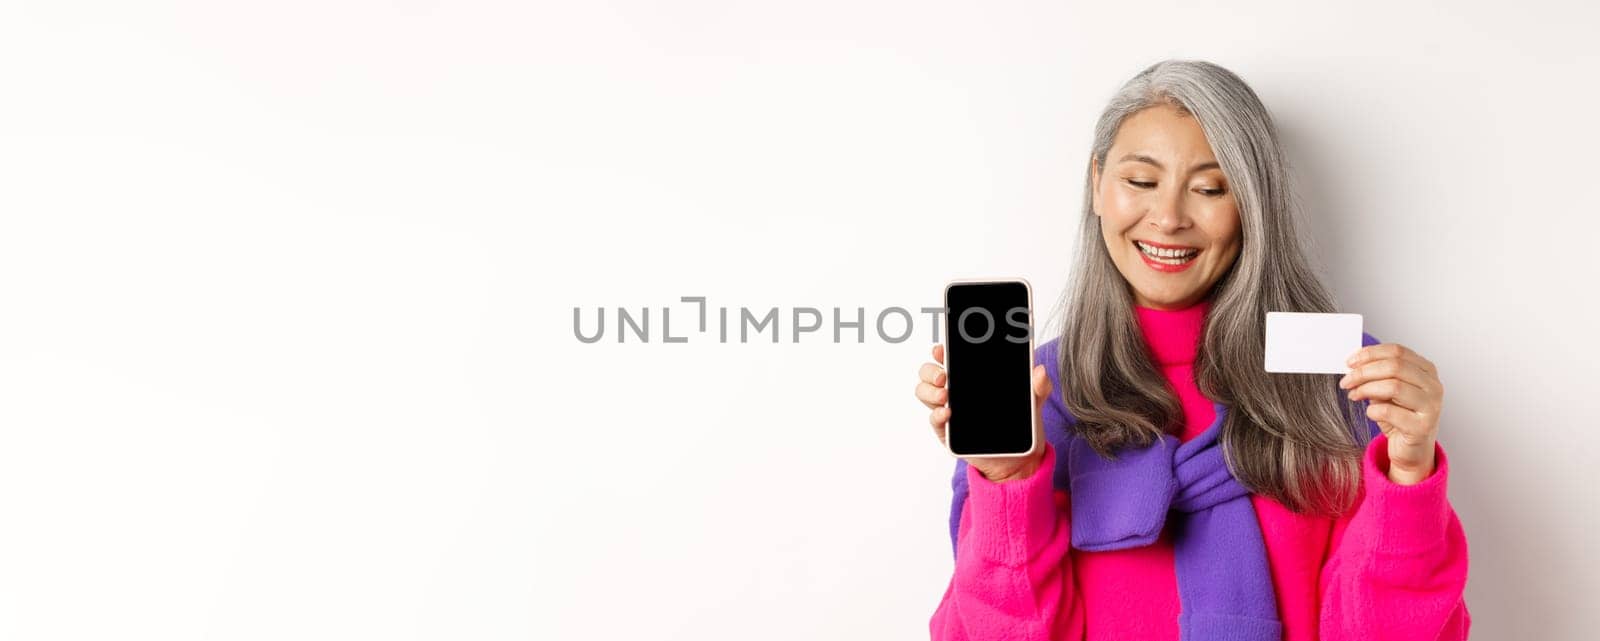 Online shopping. Closeup of fashionable old woman showing blank smartphone screen, looking pleased at plastic credit card, standing over white background.